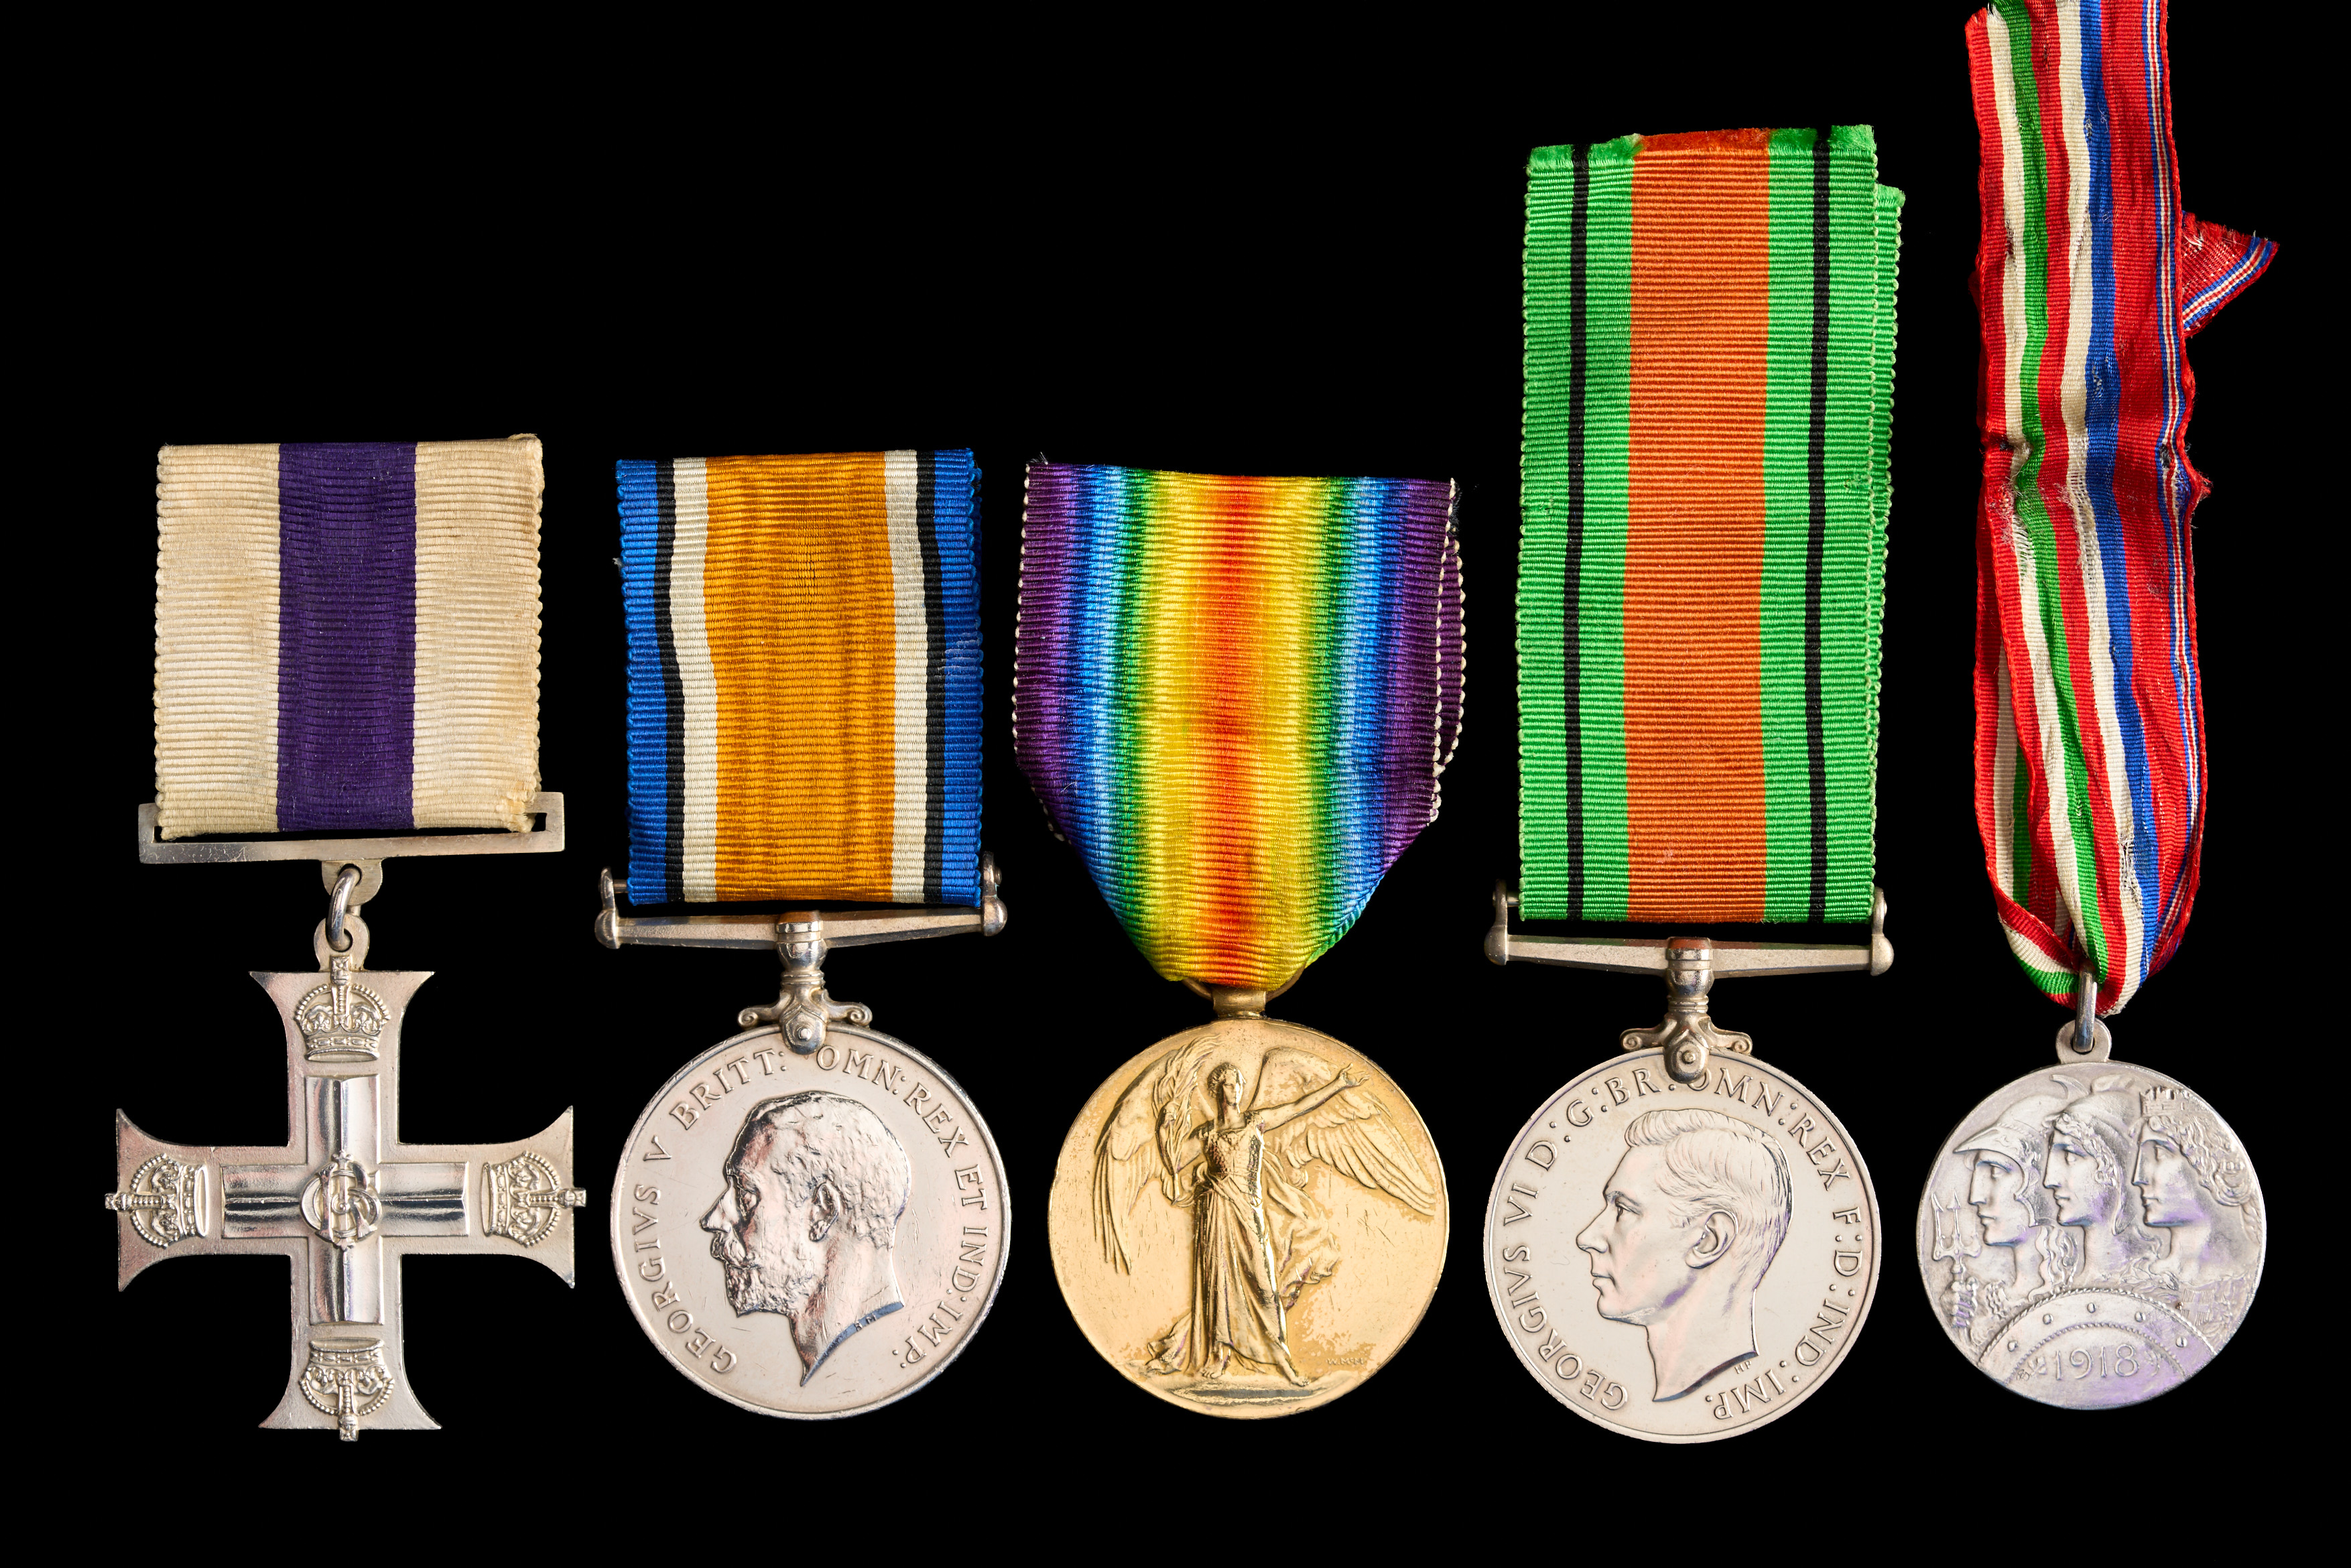 John Edwin Thompson : Military Cross; British War Medal; Allied Victory Medal; Defence Medal; 1918 Army of Altipiani ‘Victory’ Medal